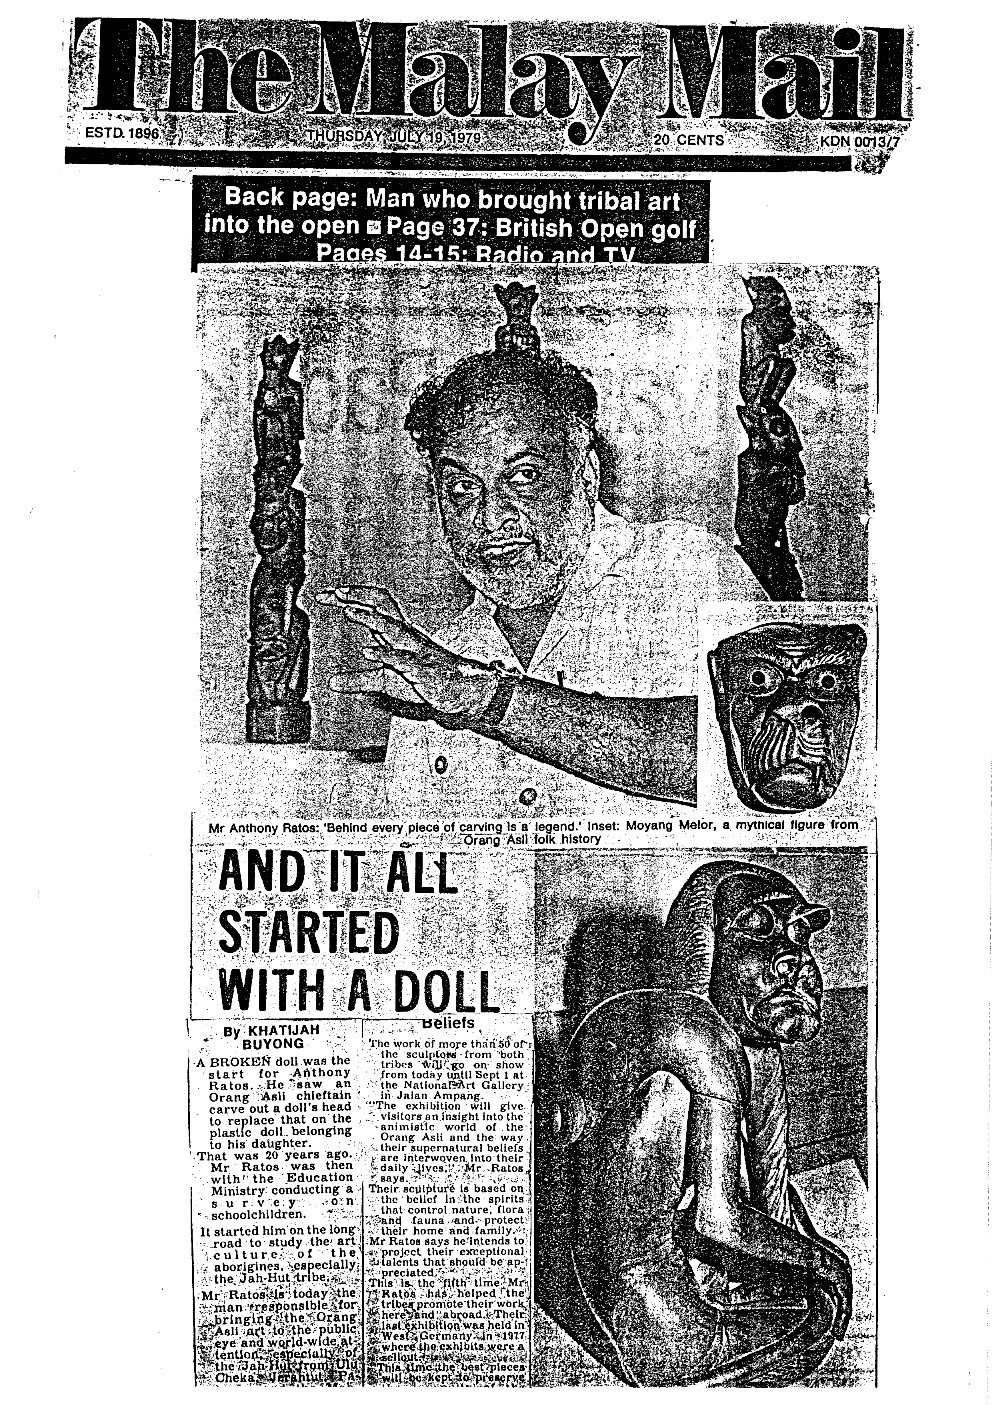 The Malay Mail, July 19, 1979